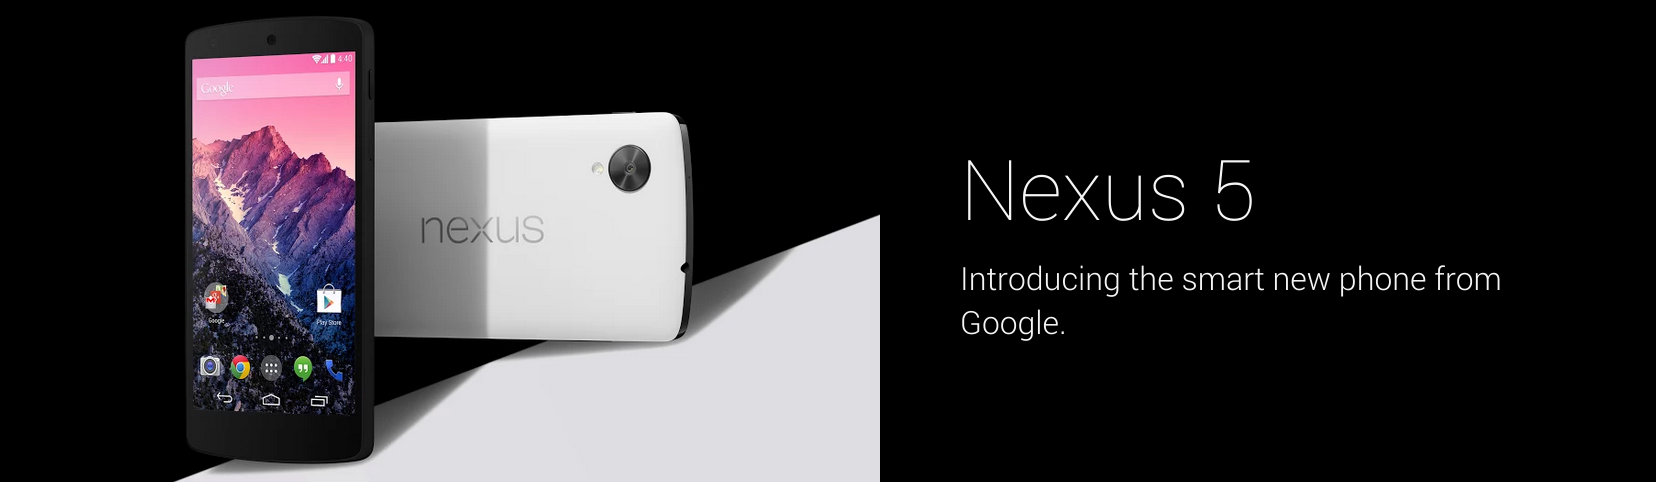 Nexus 5 Google Play Banner - for some reason we don't have an alt tag here